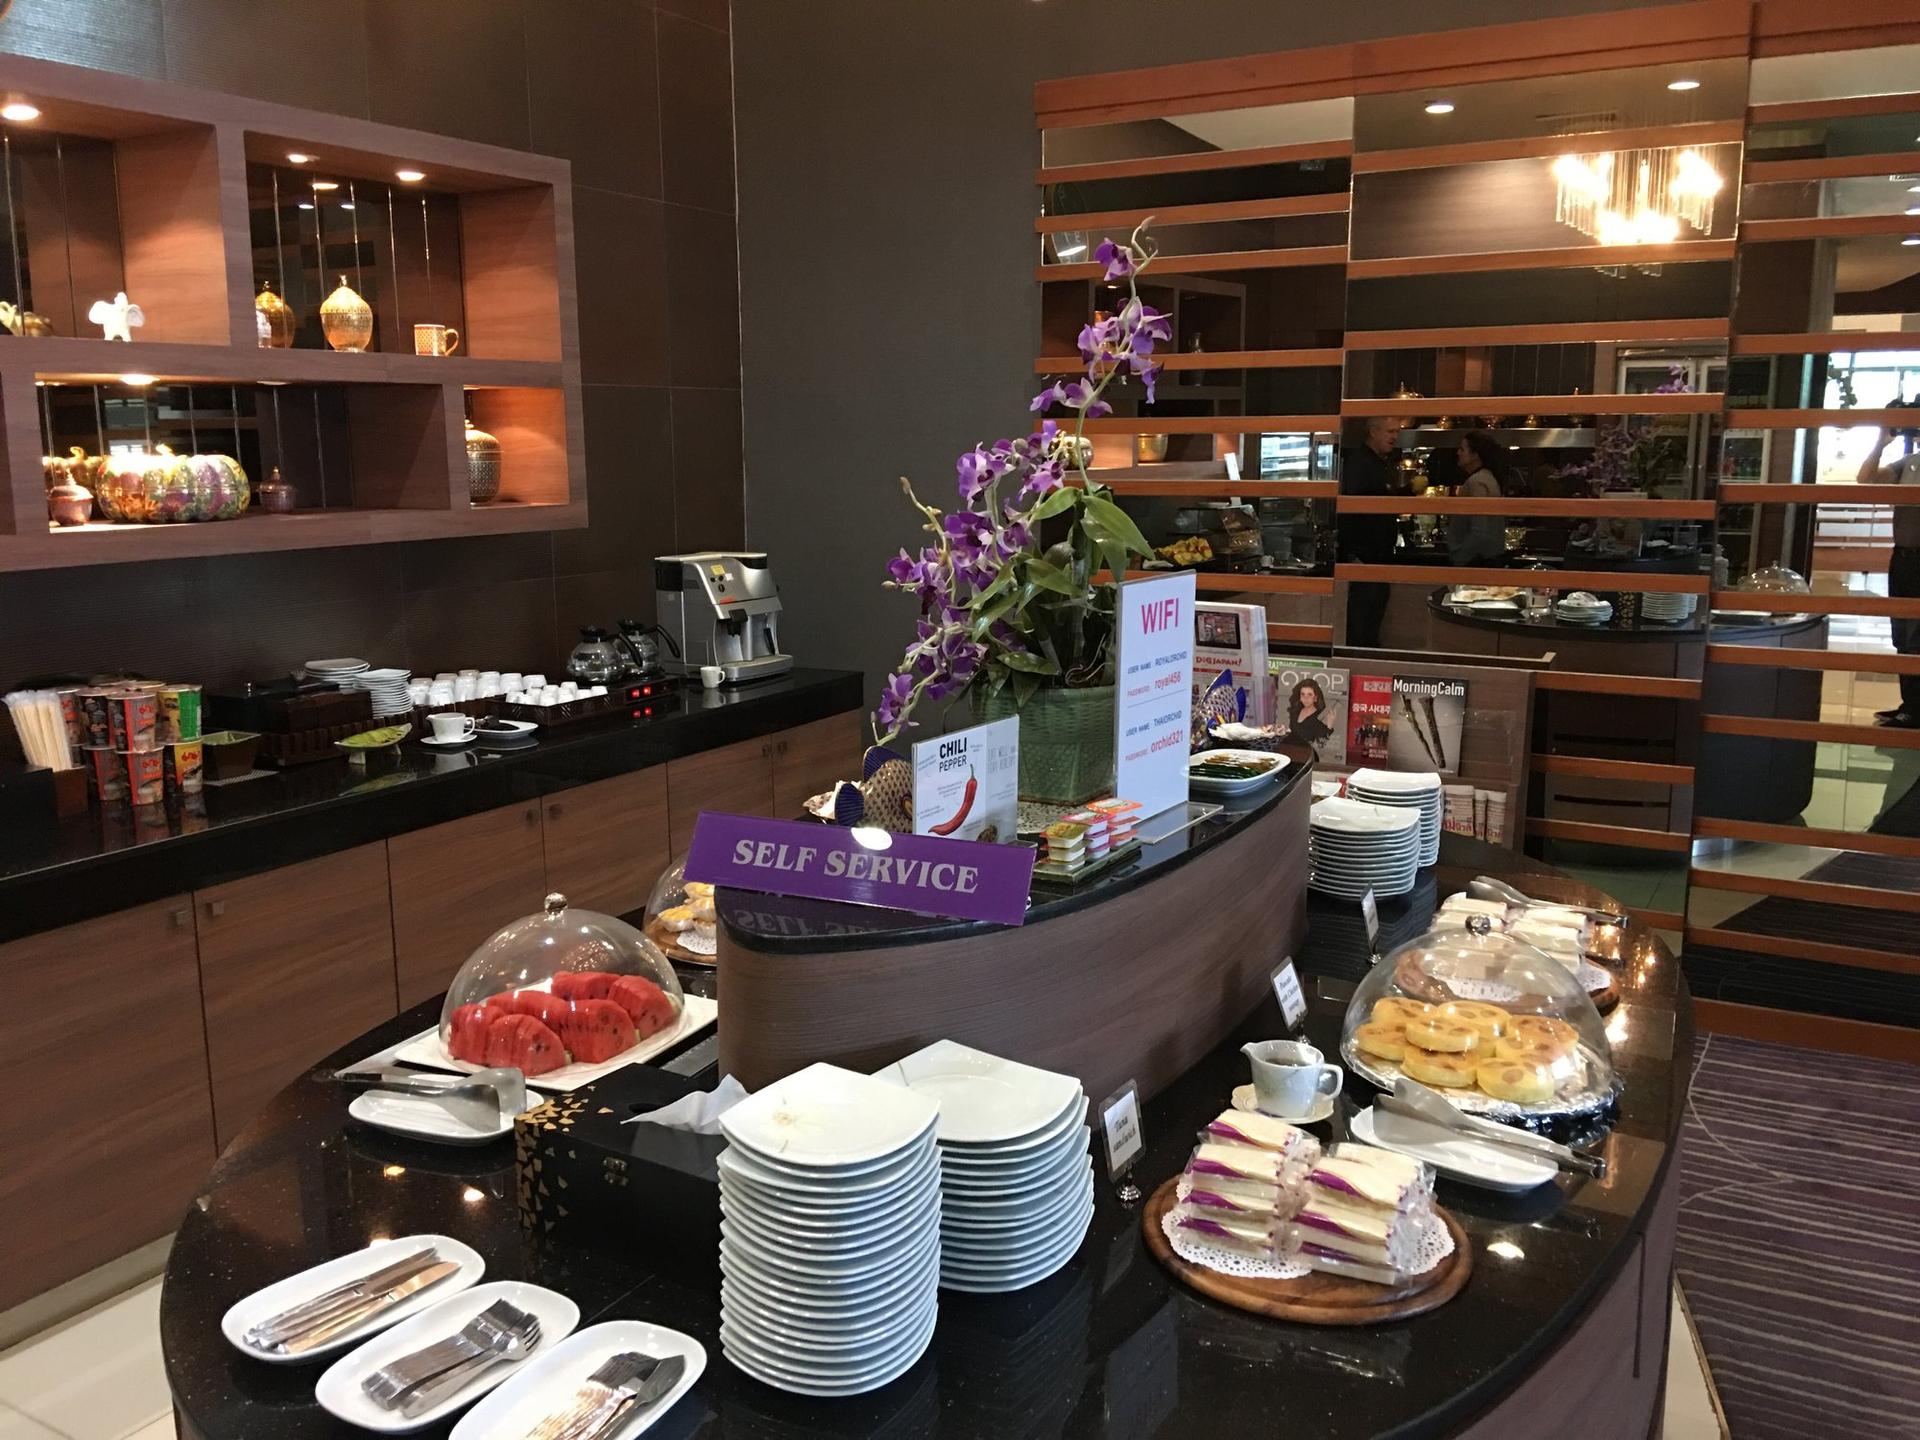 Thai Airways Royal Orchid Lounge image 1 of 3